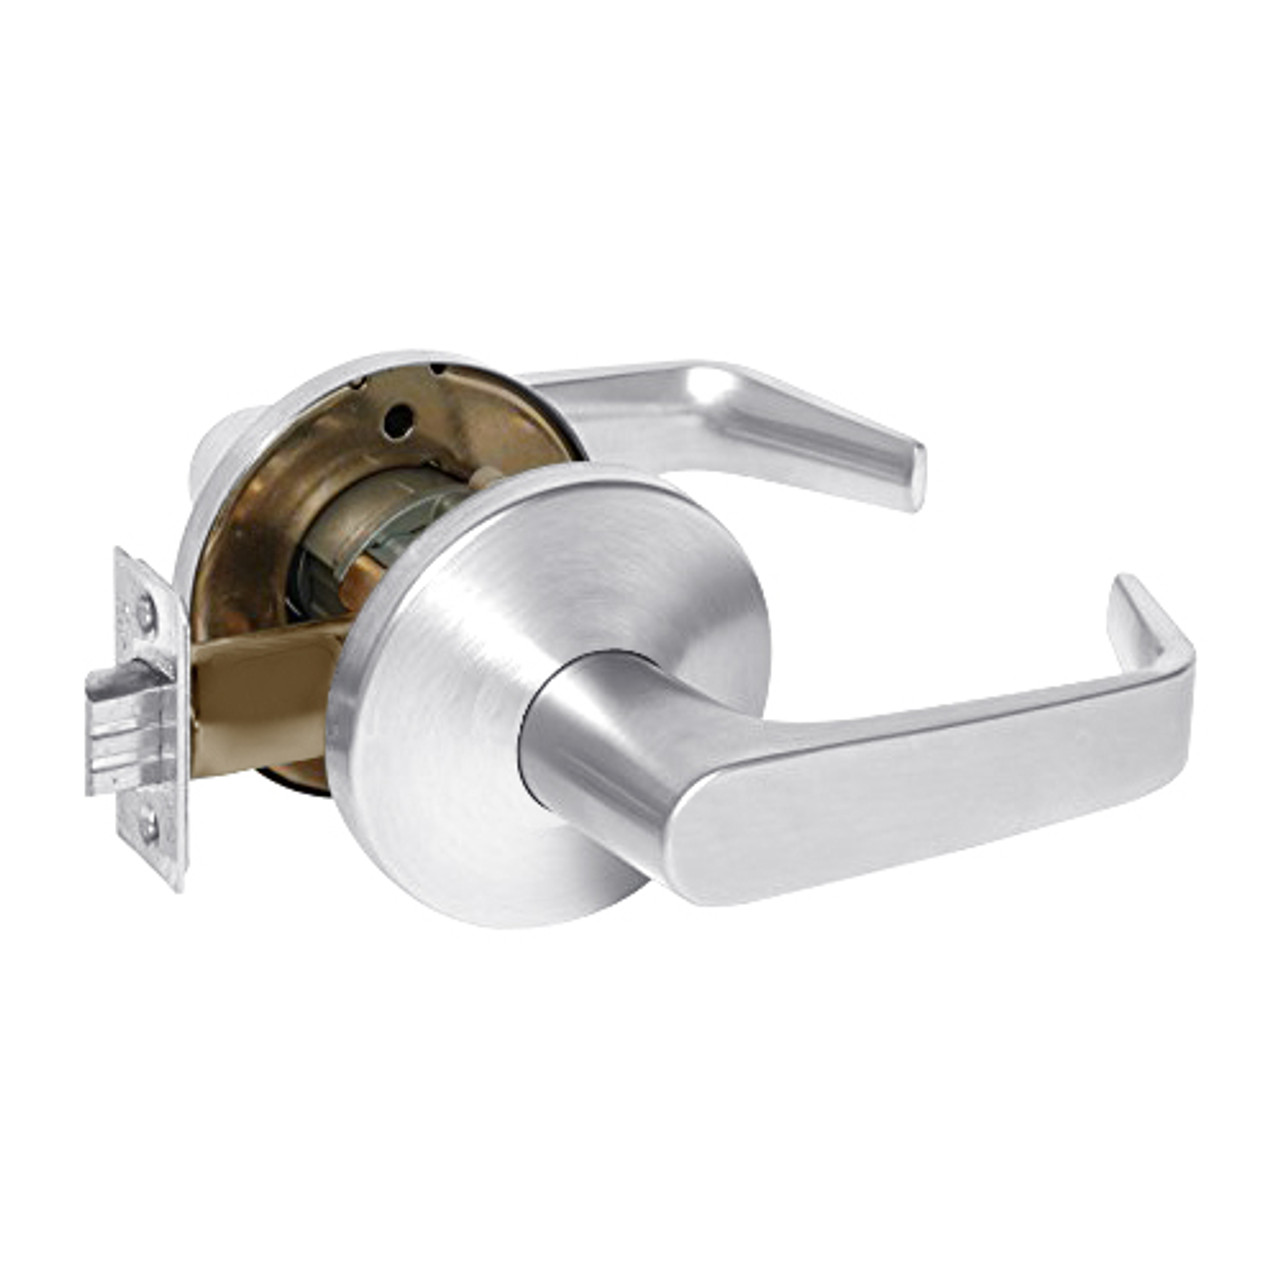 9K30N15LS3625 Best 9K Series Passage Heavy Duty Cylindrical Lever Locks with Contour Angle with Return Lever Design in Bright Chrome